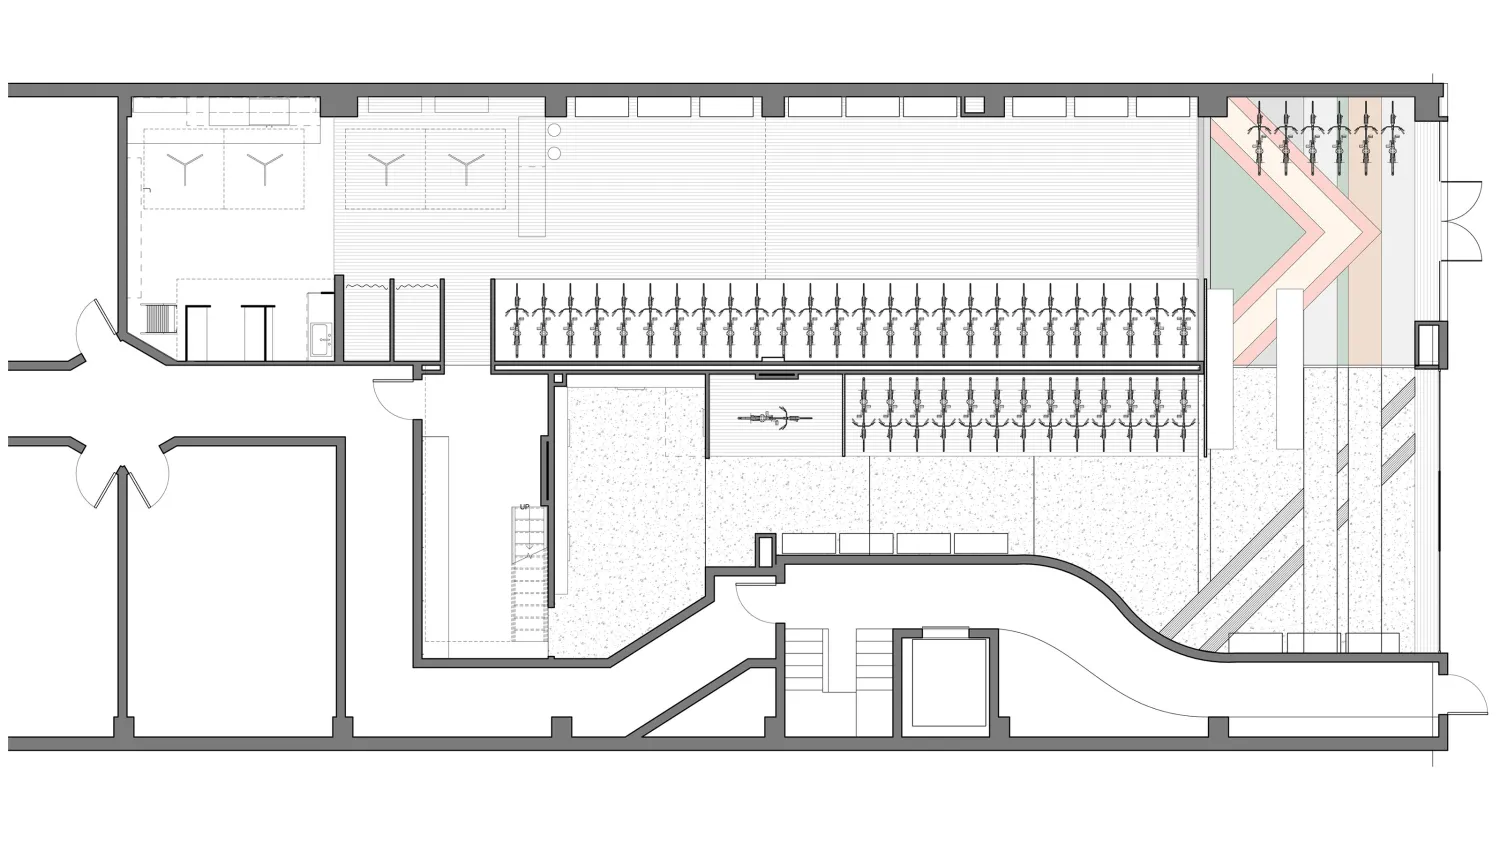 Floor plan with bicycle storage for Huckleberry Bicycles in San Francisco.